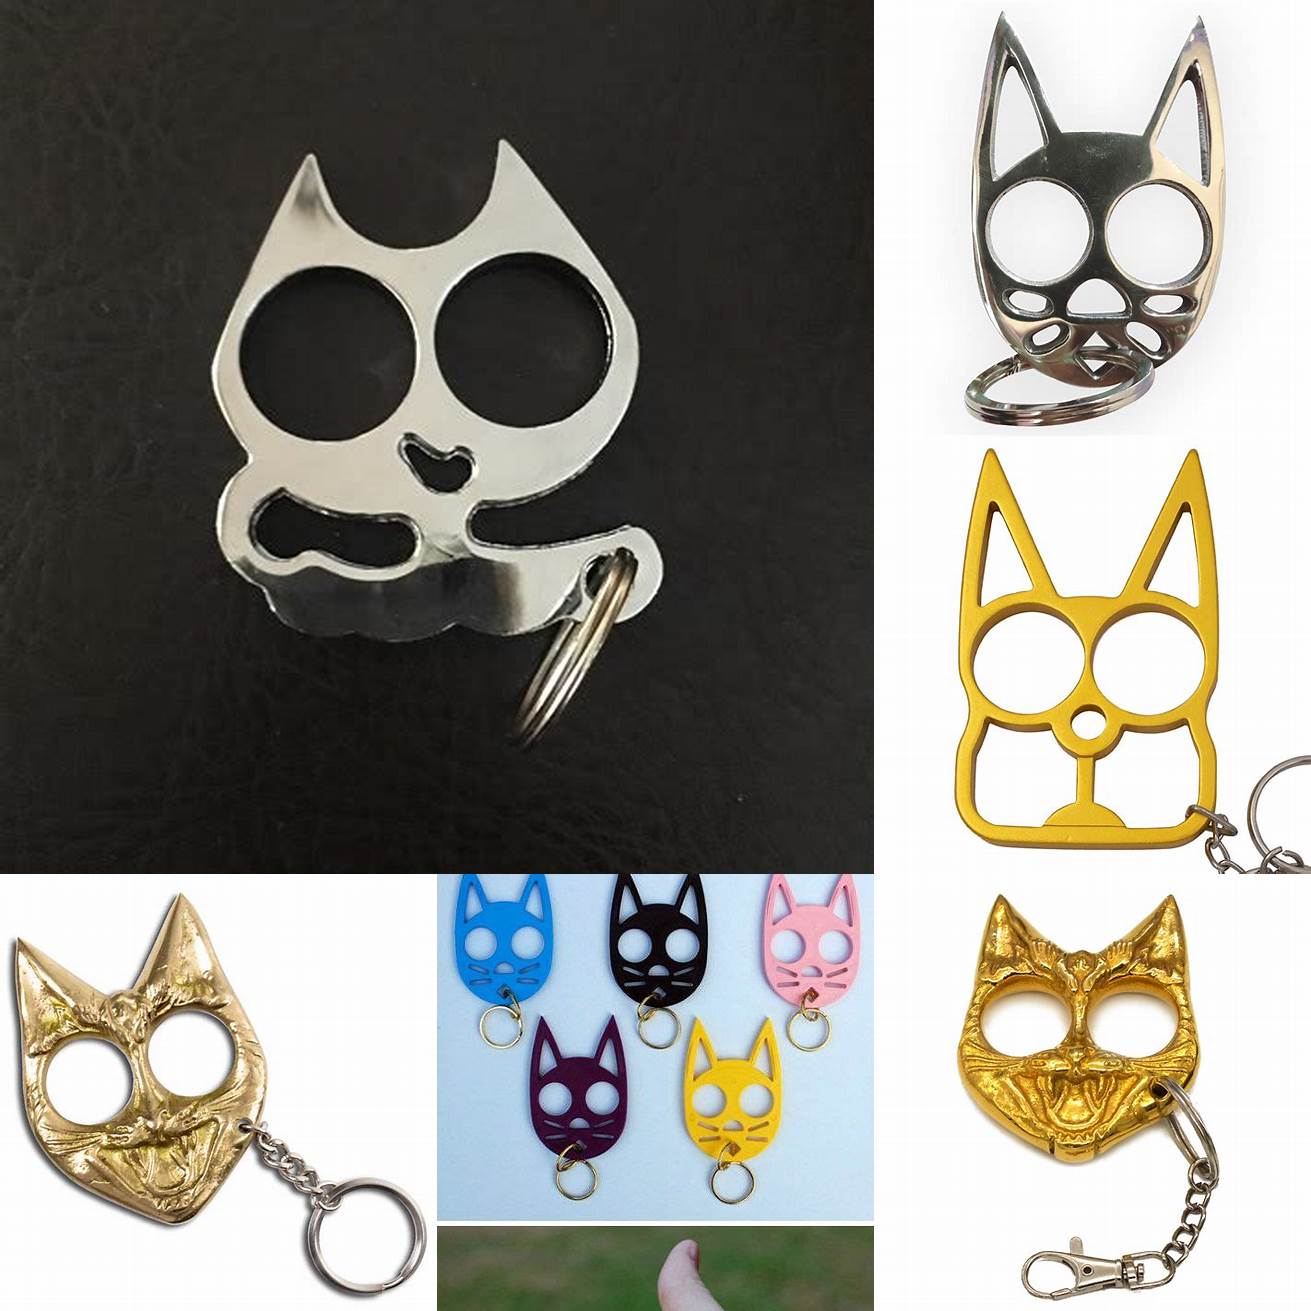 Image 5 Different Designs of Cat Brass Knuckles Keychain